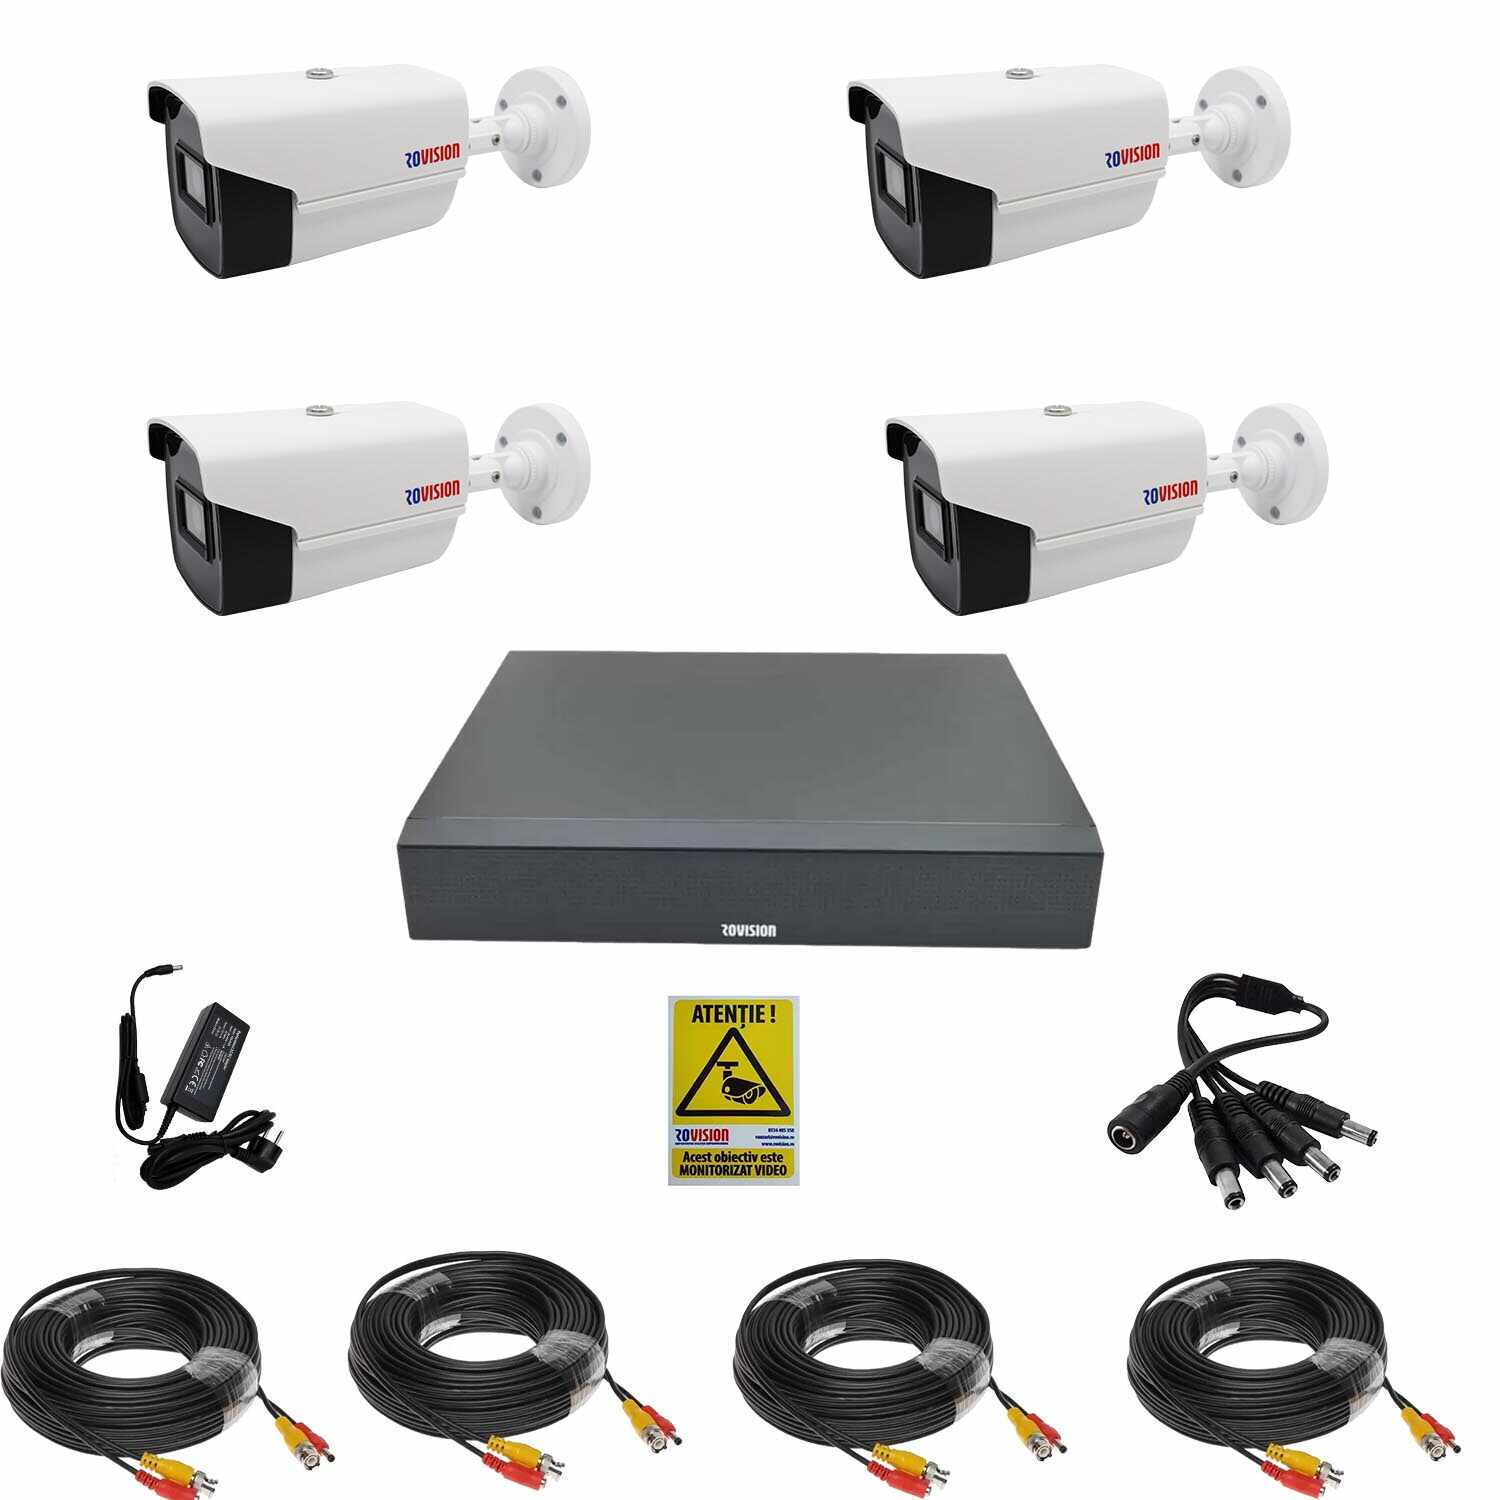 Kit Rovision complet 4 camere supraveghere exterior full hd 40 metri IR 1080P